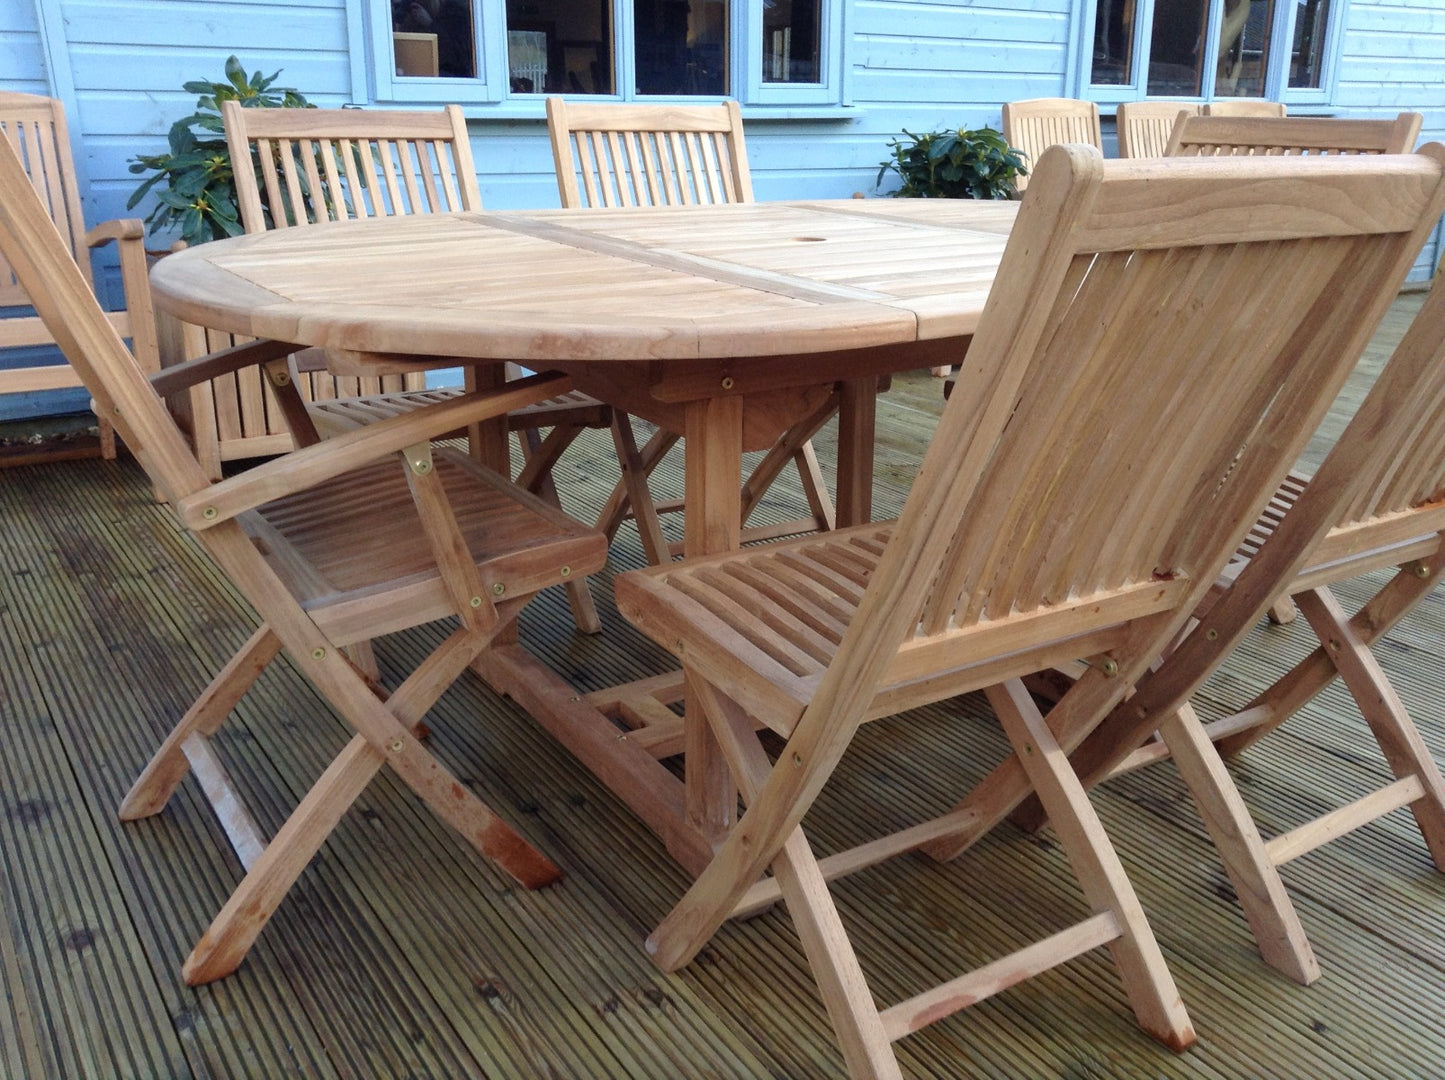 6 Seater Oval Pedestal Teak Set with Folding Chairs & Armchairs